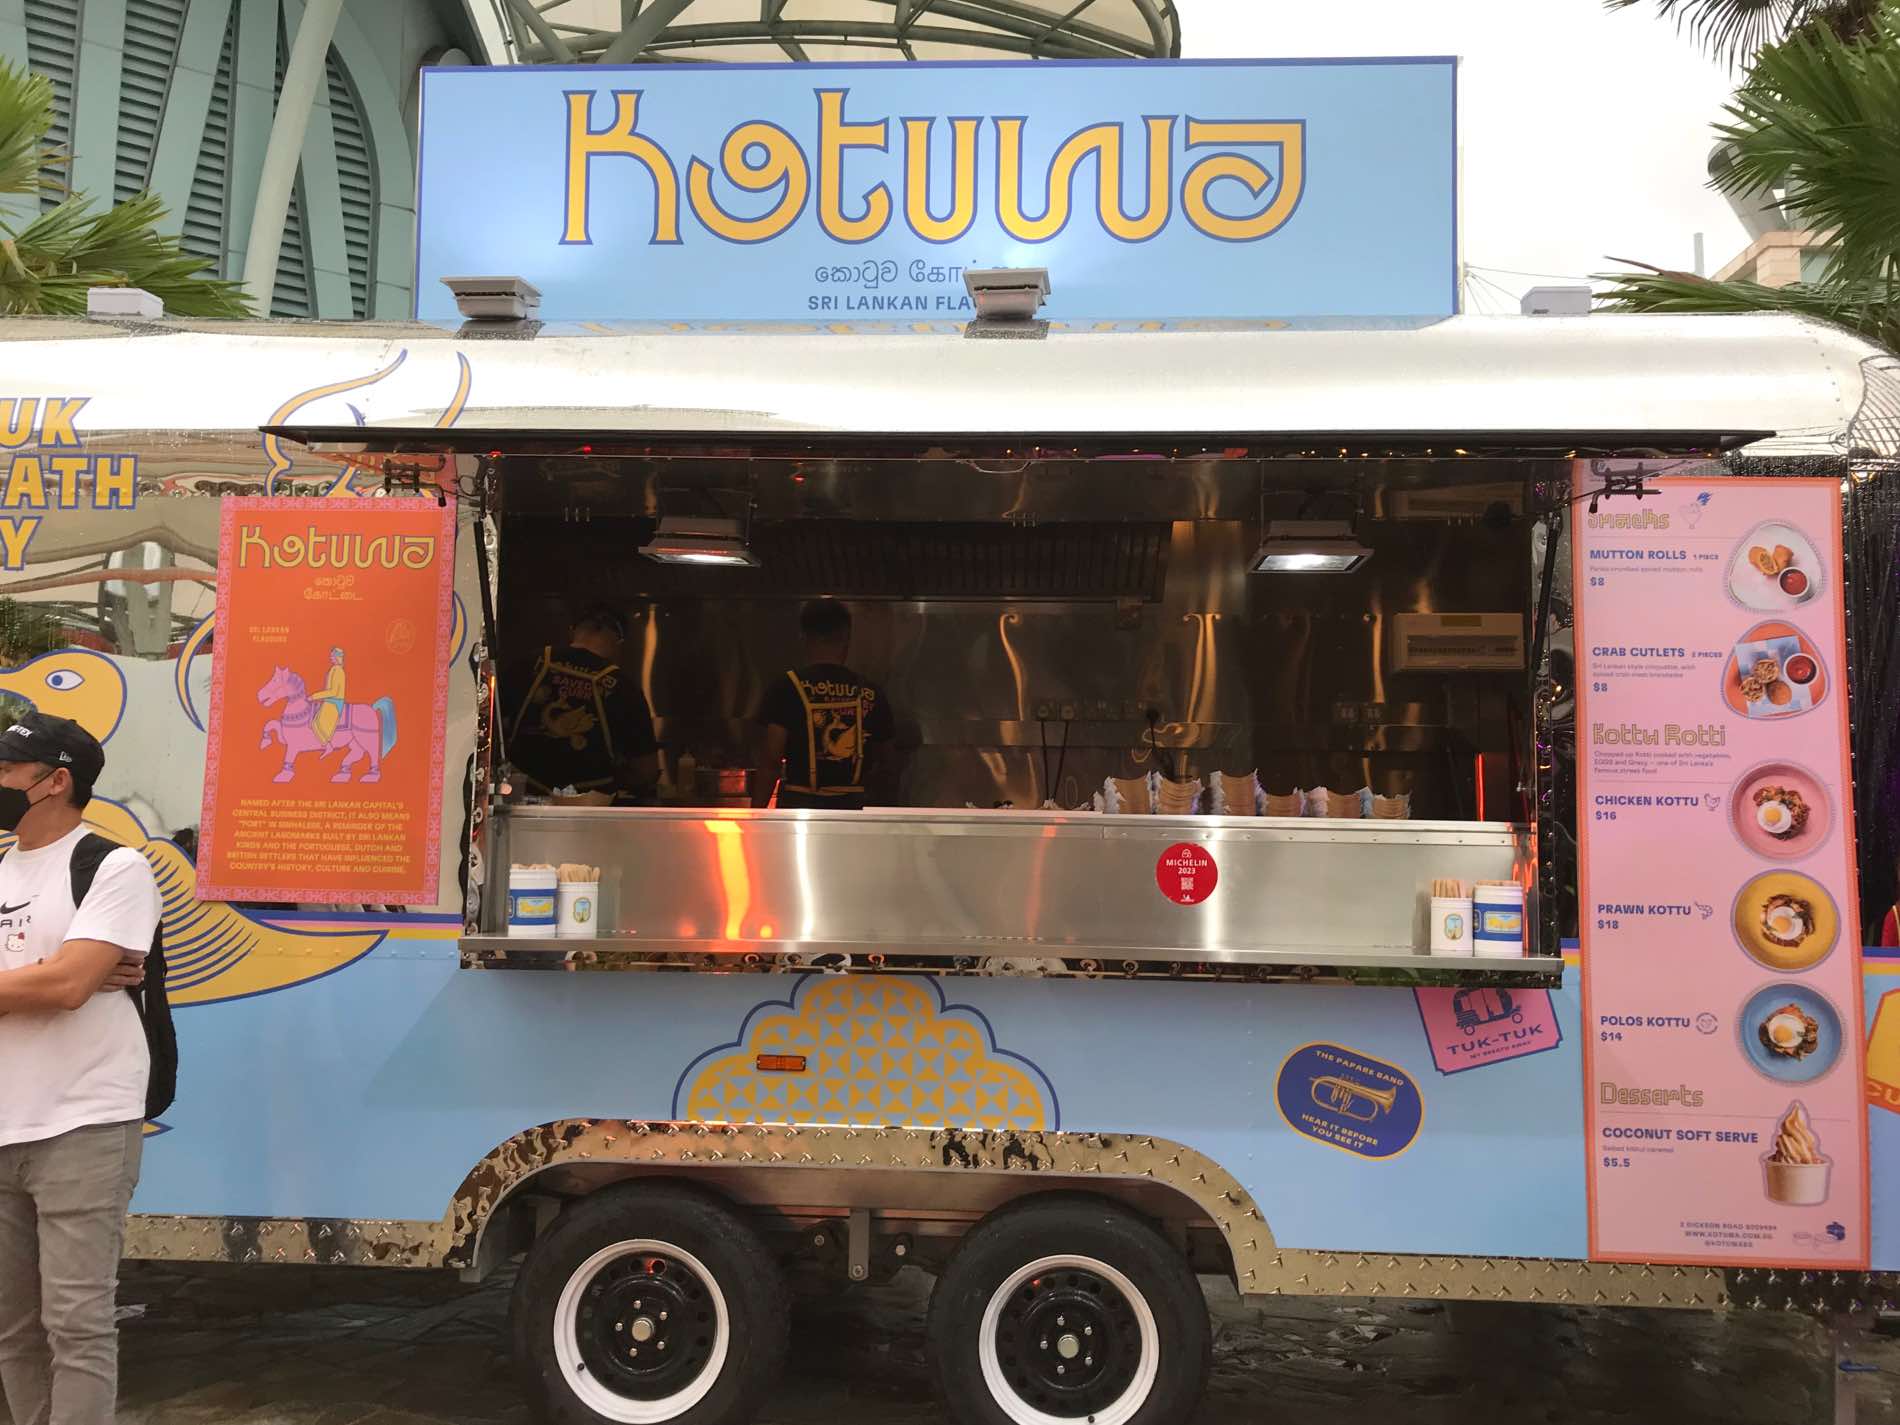 , Gourmet Park at Resorts World Sentosa is the new food truck hotspot for all foodies